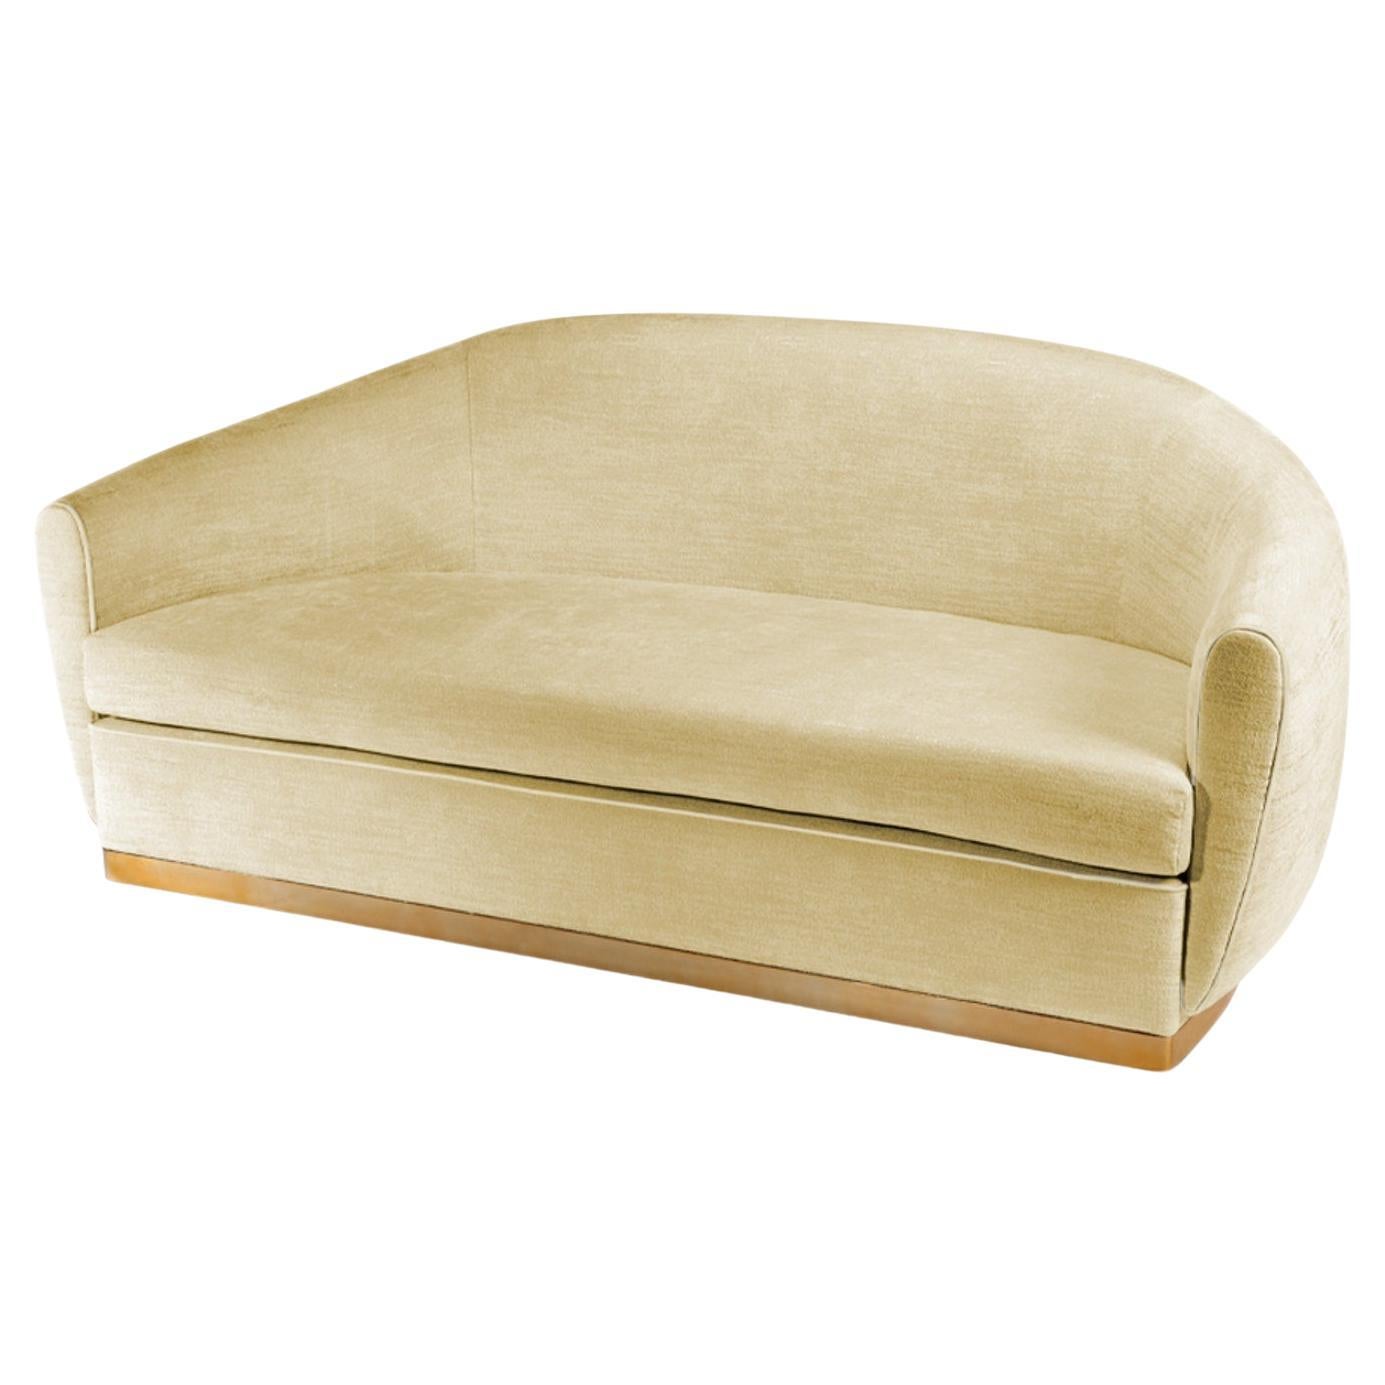 Sofa Grace 3-Seat in Yellow Marka Barket Upholstery and Polished Brass Base For Sale